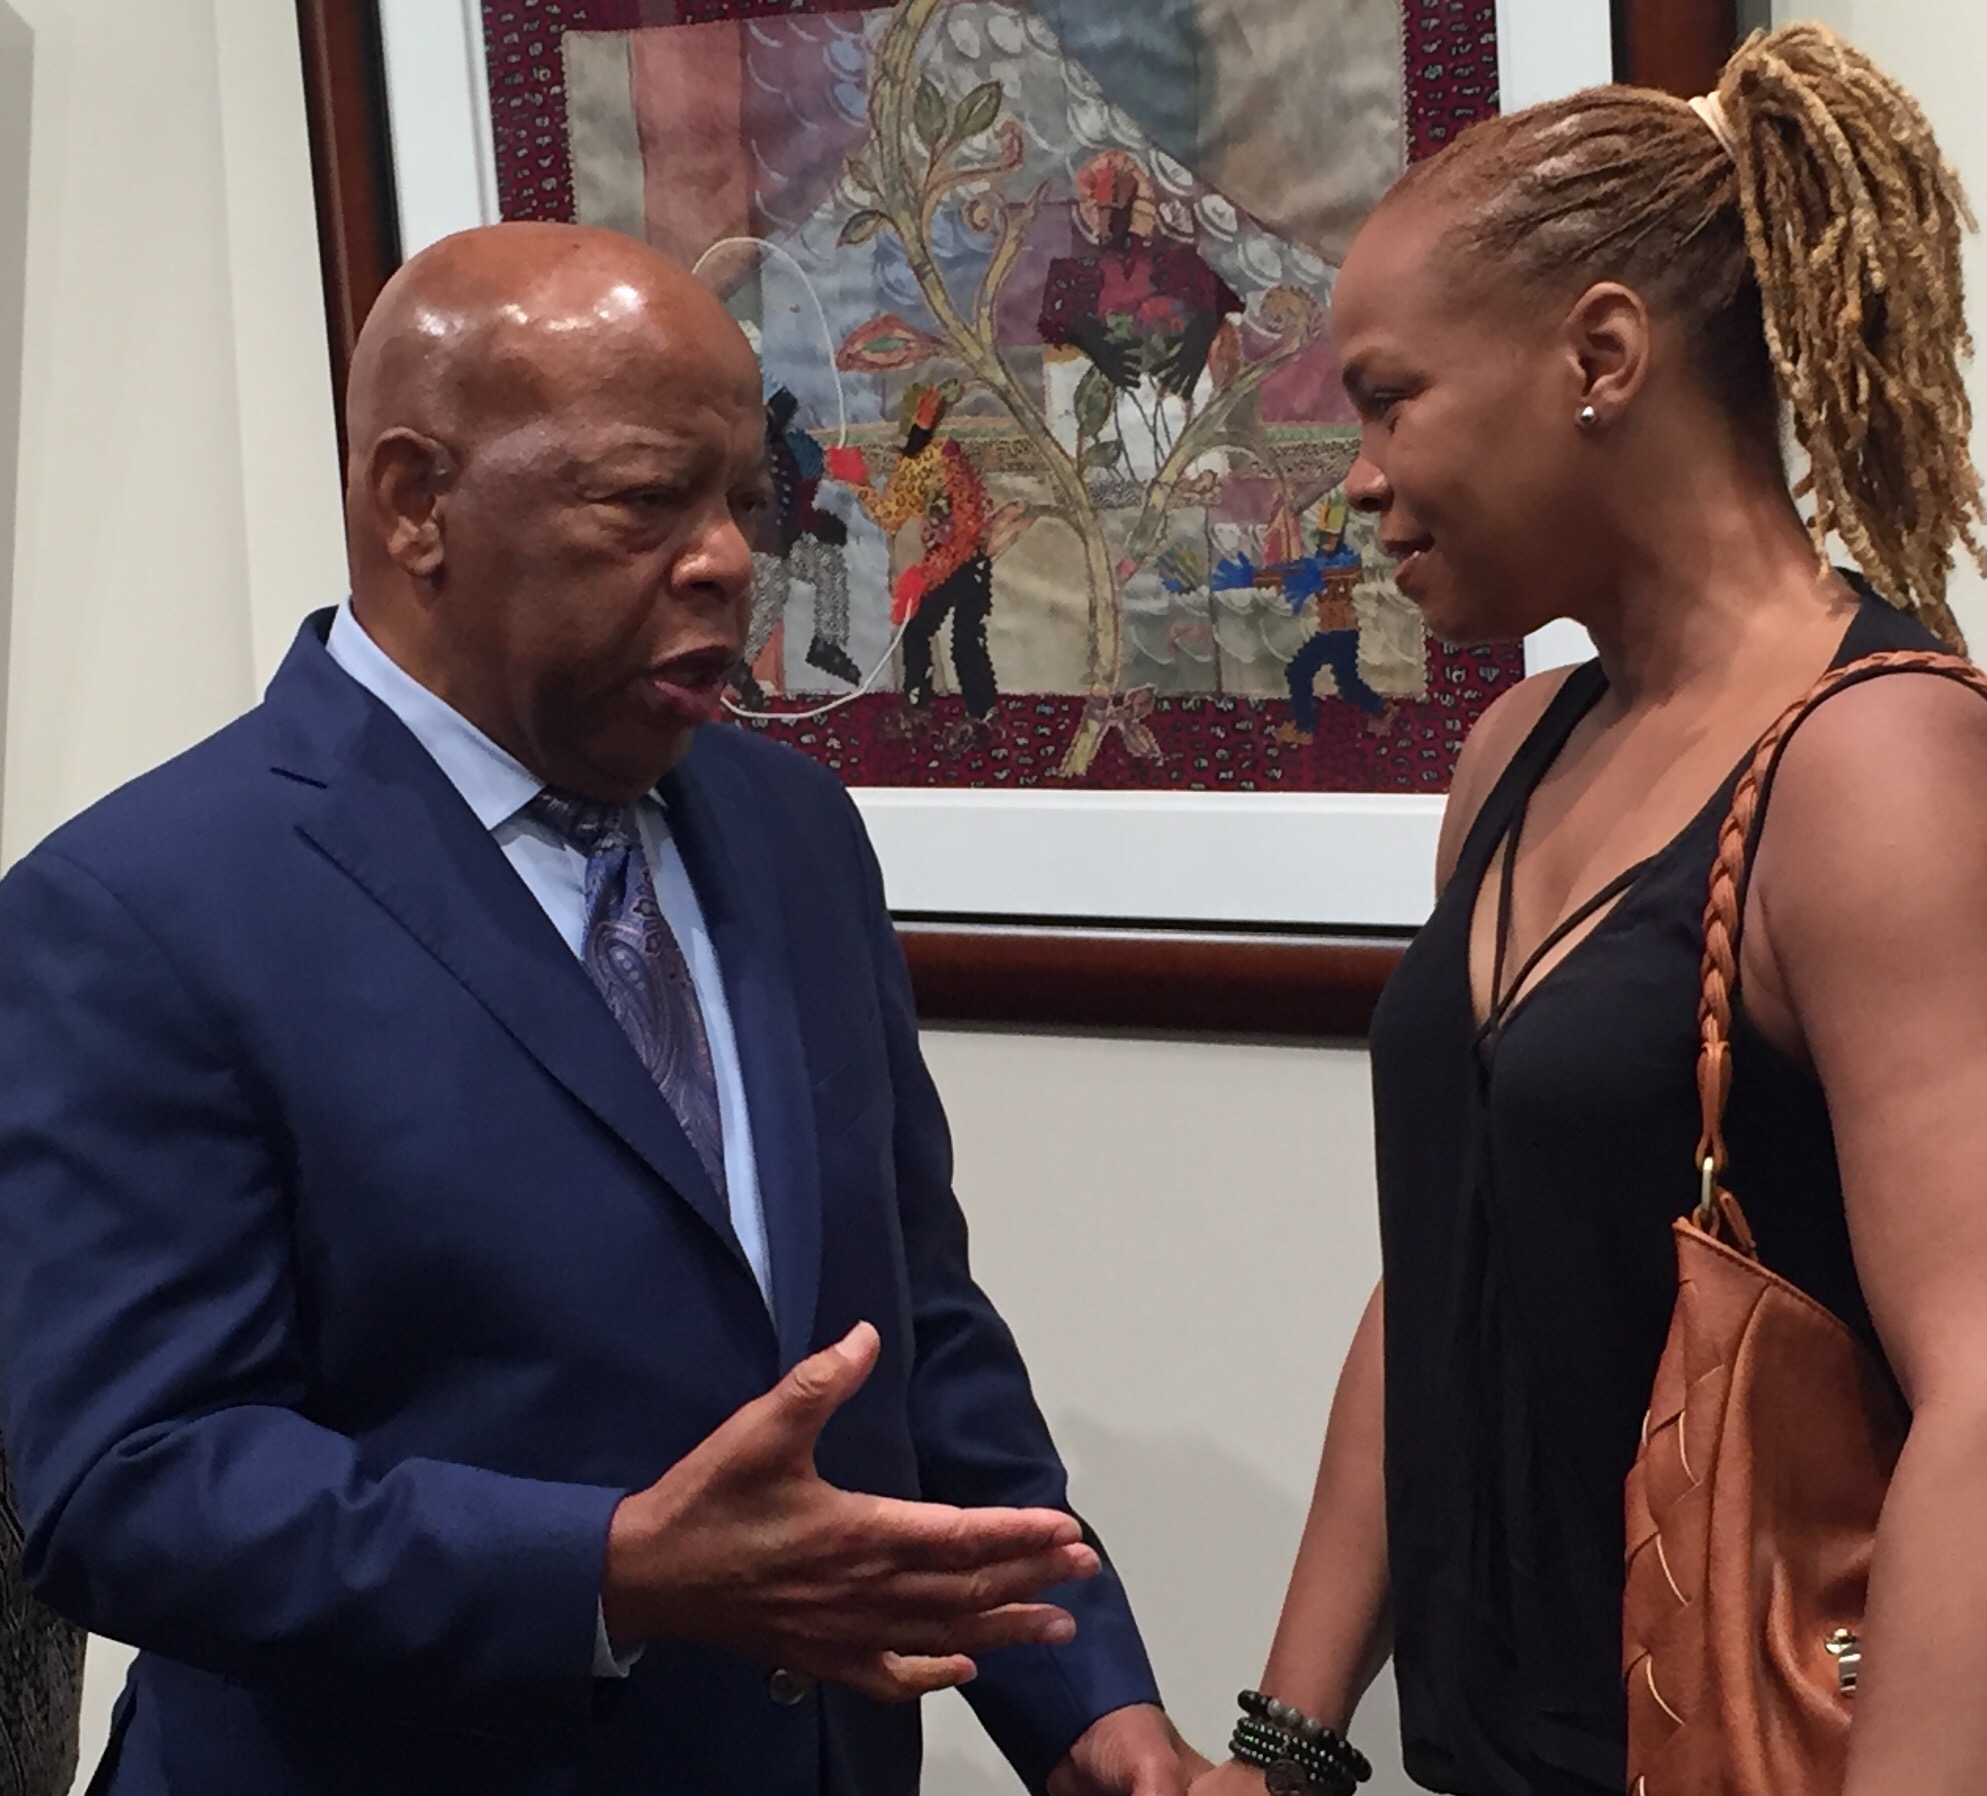  Monique sharing a moment with the event’s Guest Speaker—Civil Rights icon, Congressman John Lewis. 